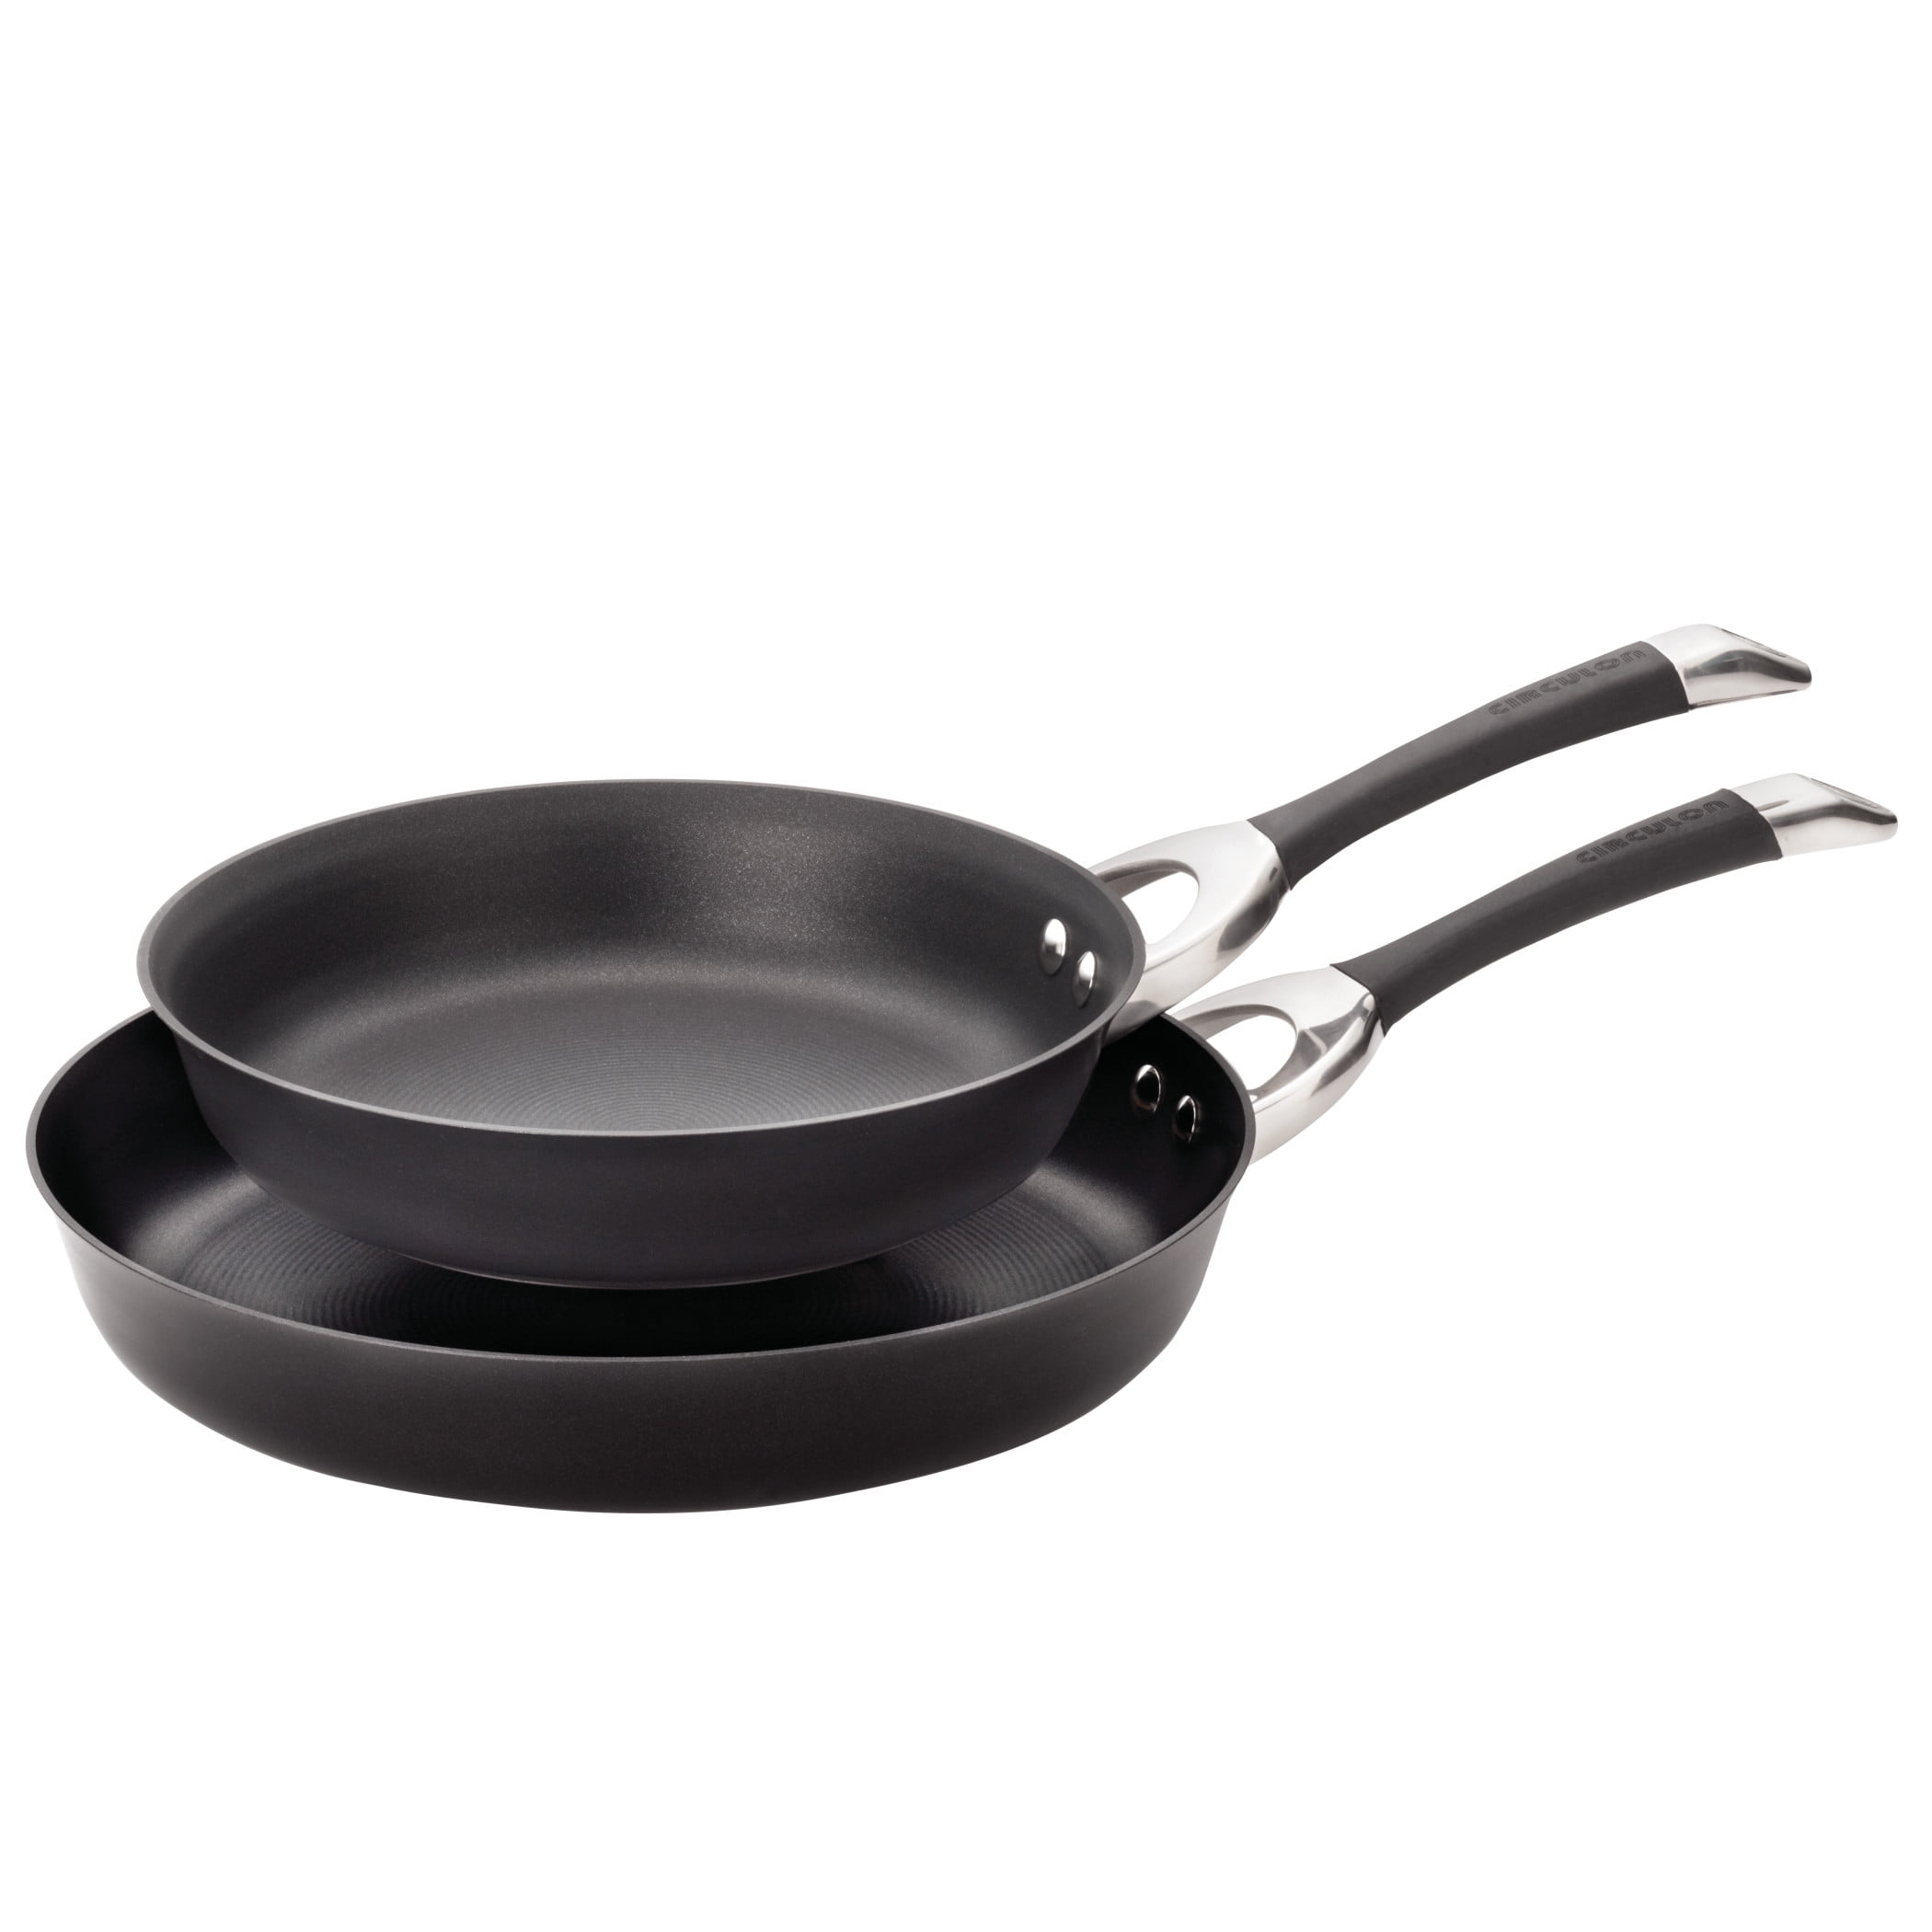 T-fal Ultimate Hard Anodized Nonstick Fry Pan Set 10, 12 Inch